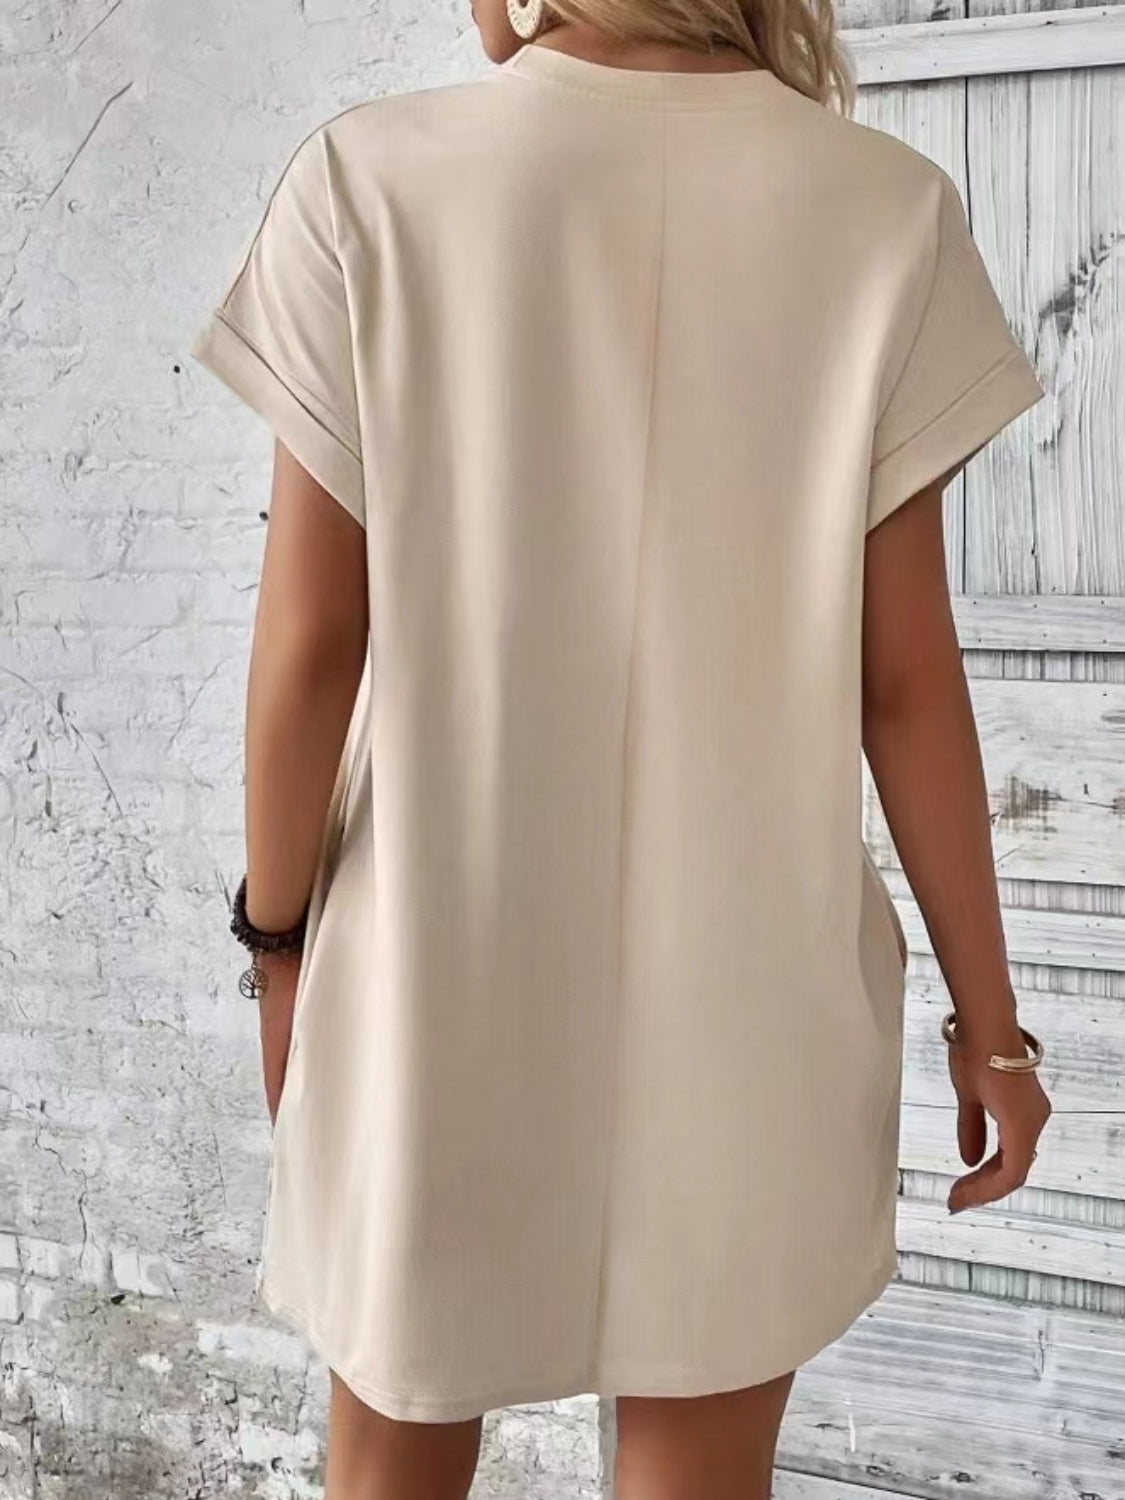 Pocketed Round Neck Short Sleeve Dress *8 colors*